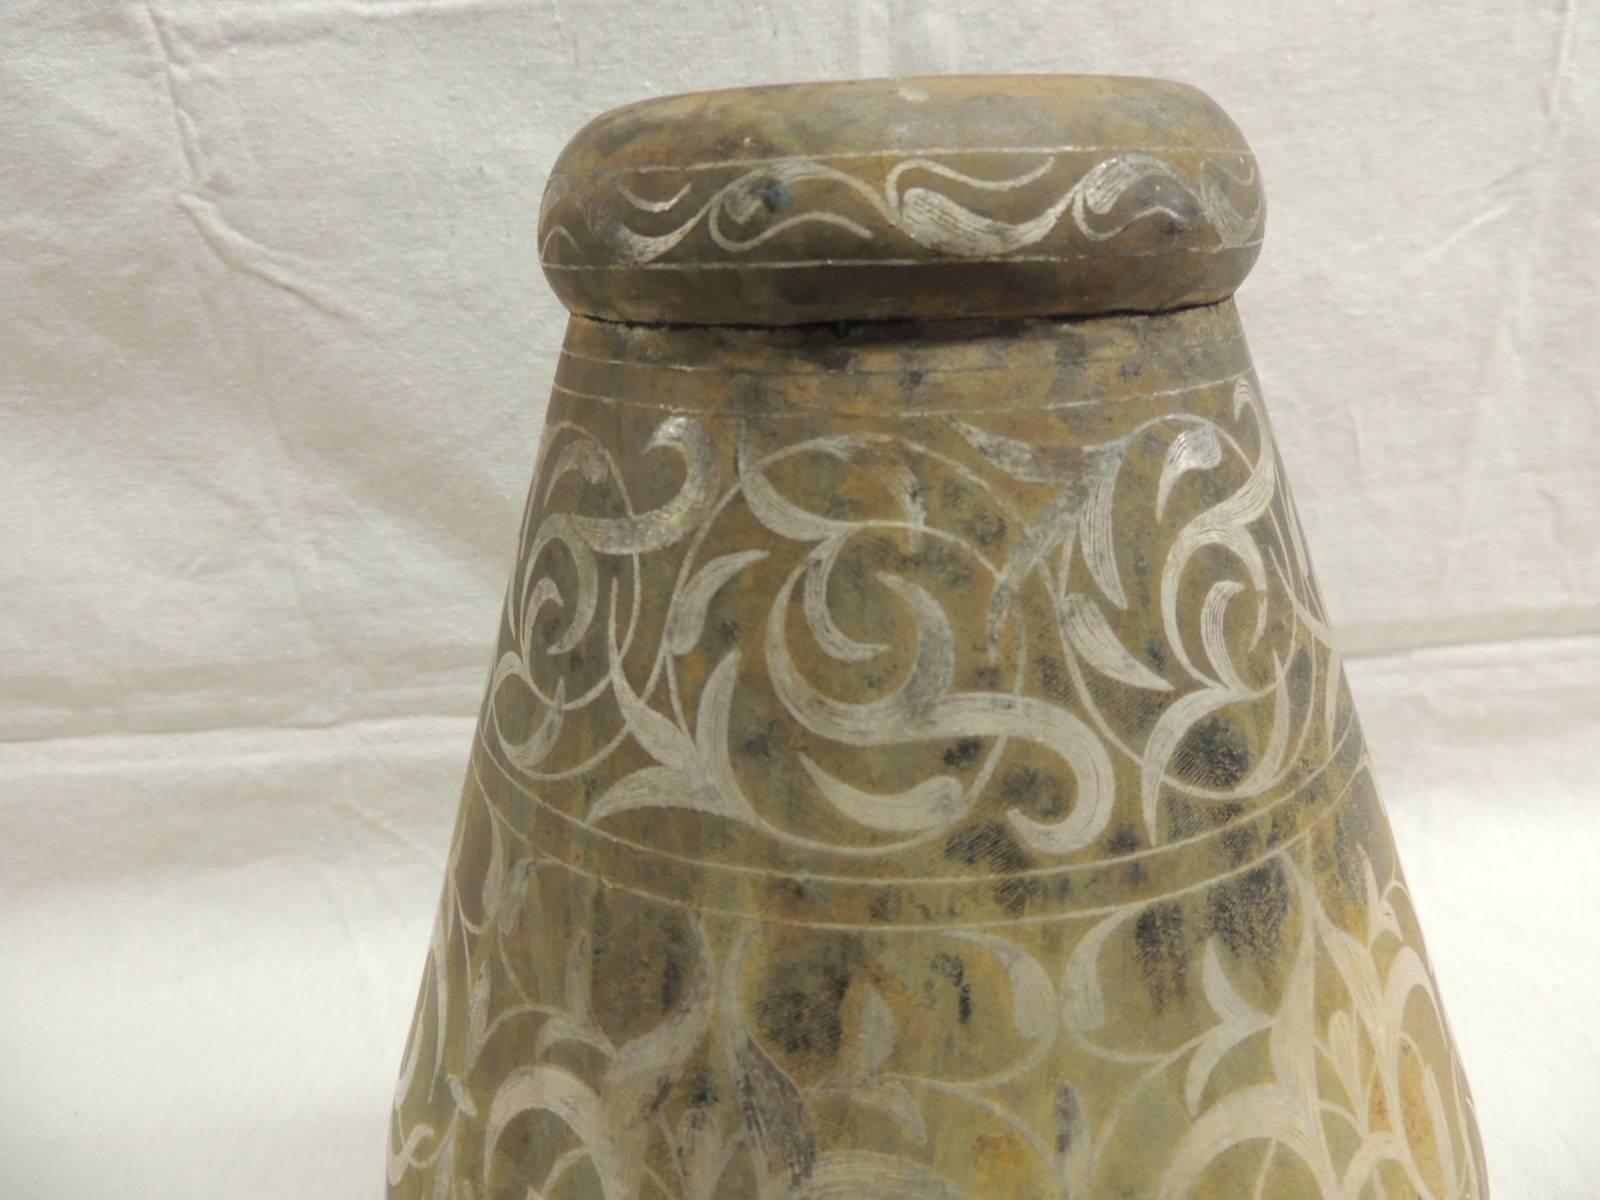 Tall vintage Indian ceramic vase with silver painted details of flowers and vines.
Ideal for a console or entry hall table.
Fireplace mantel or dining table.